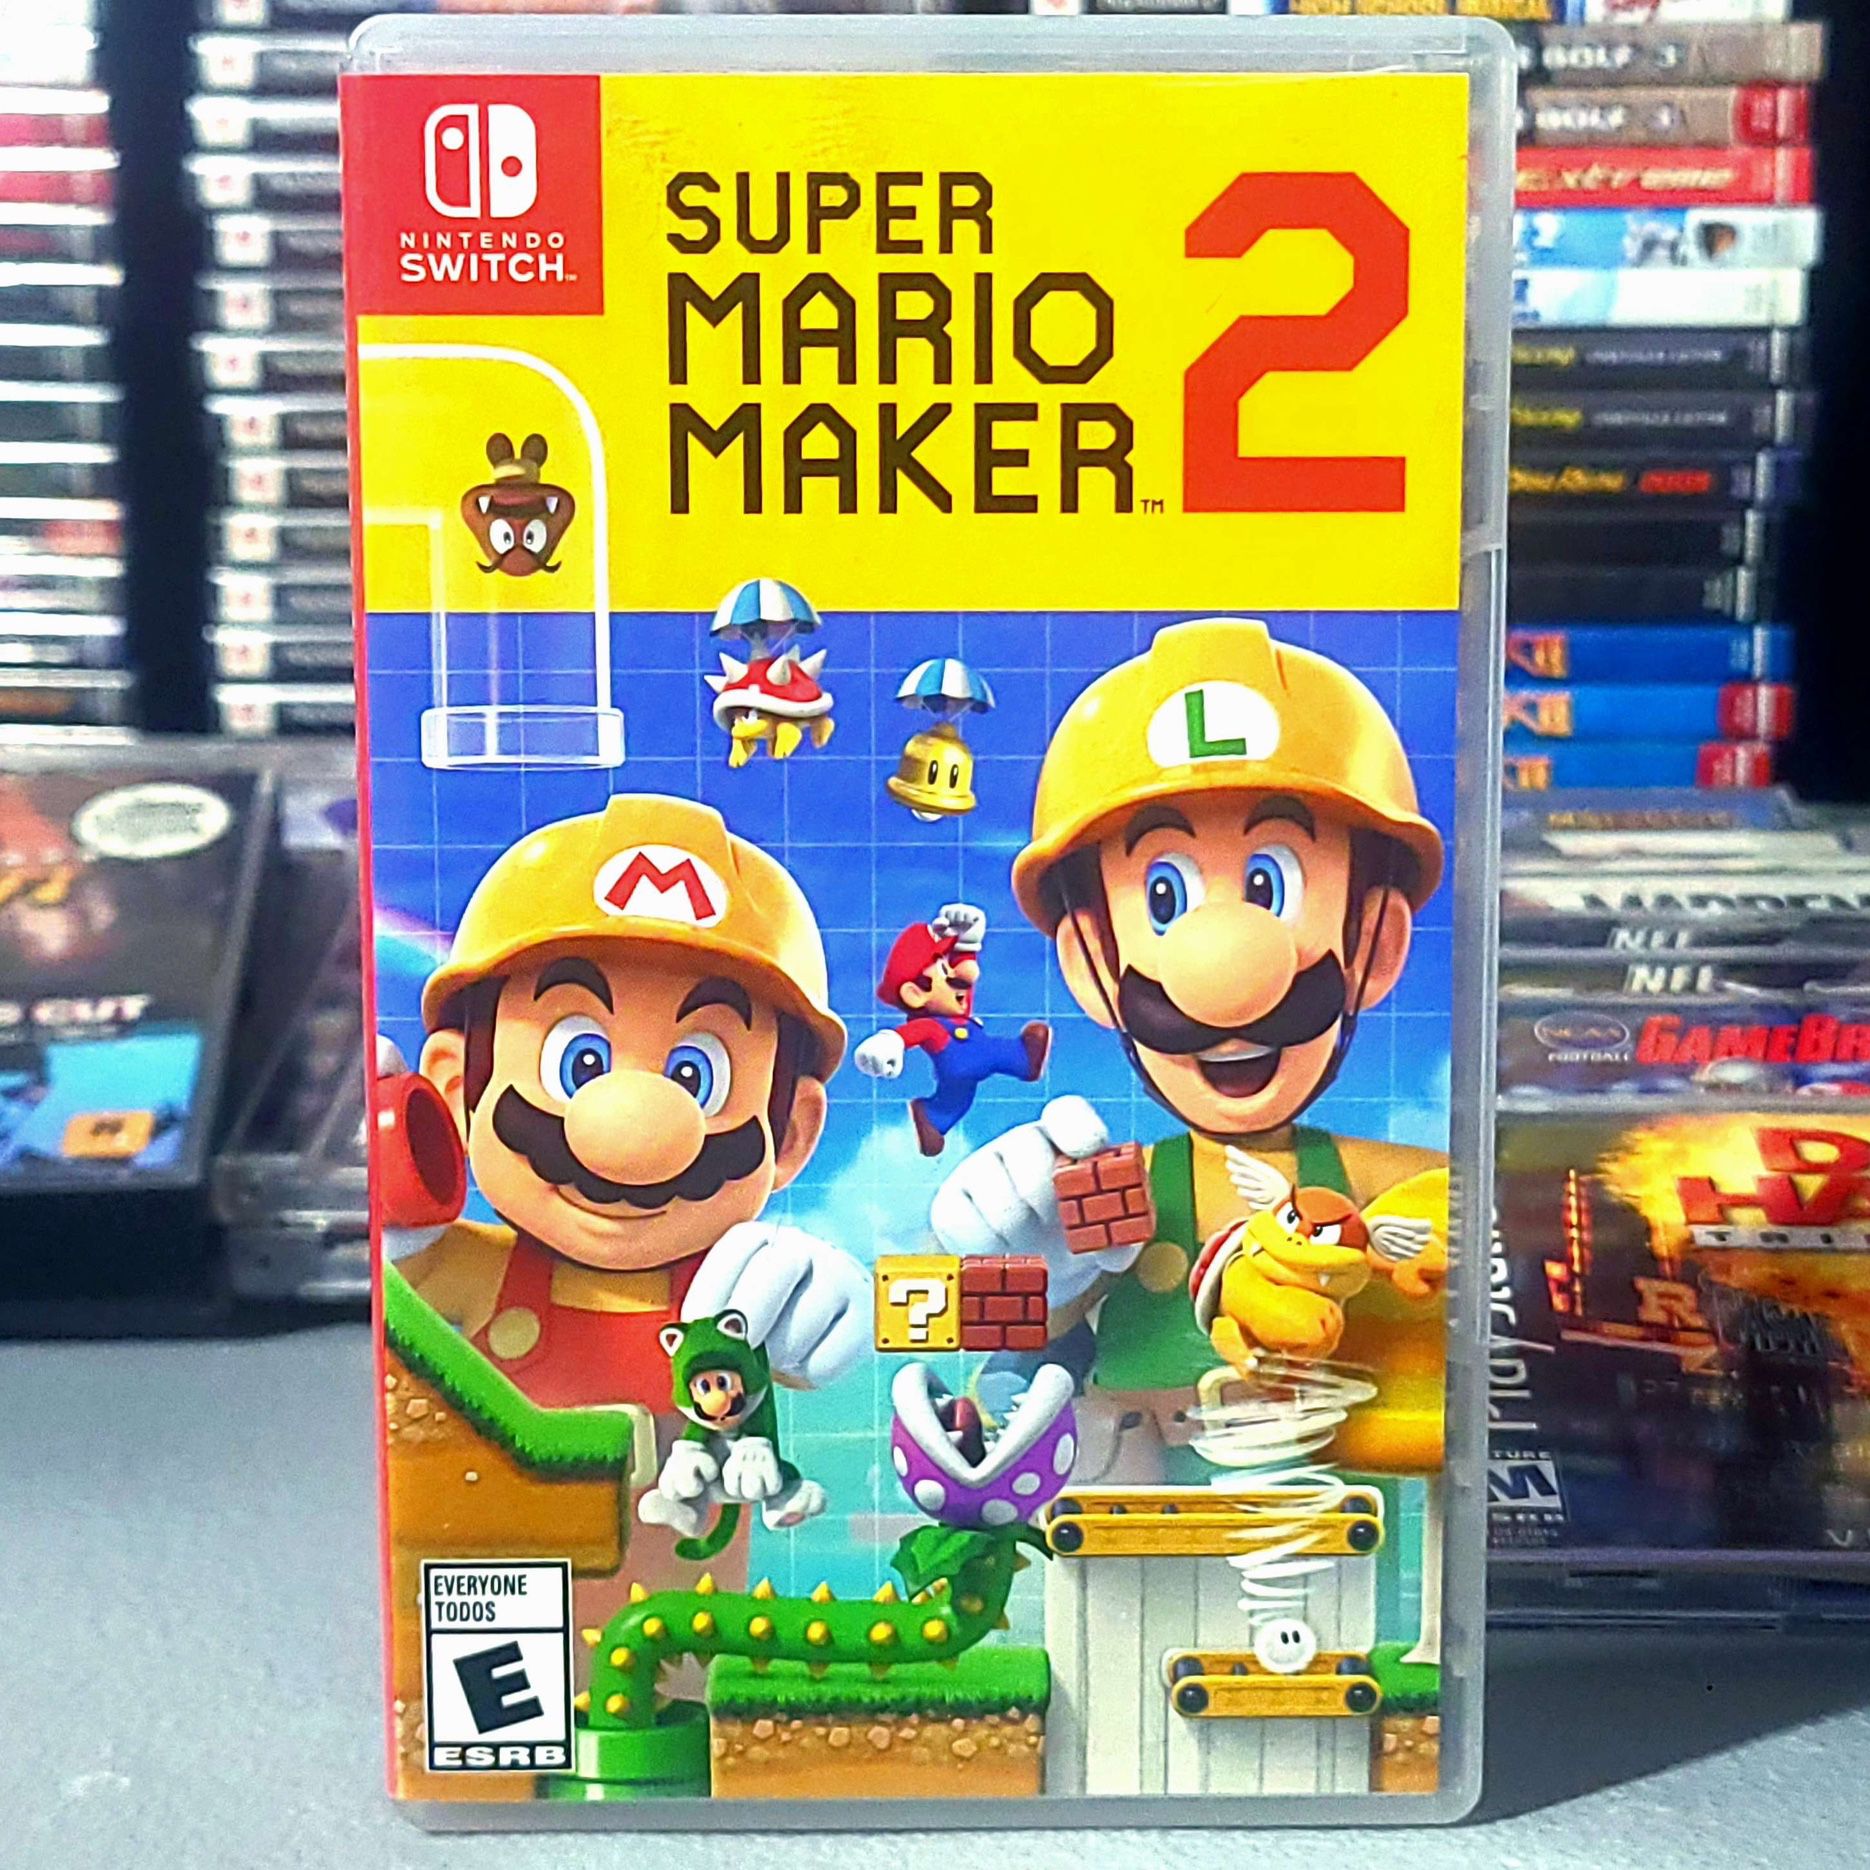 Super Mario Maker 2 (Nintendo Switch, 2019)  *TRADE IN YOUR OLD GAMES/TCG/COMICS/PHONES/VHS FOR CSH OR CREDIT HERE*